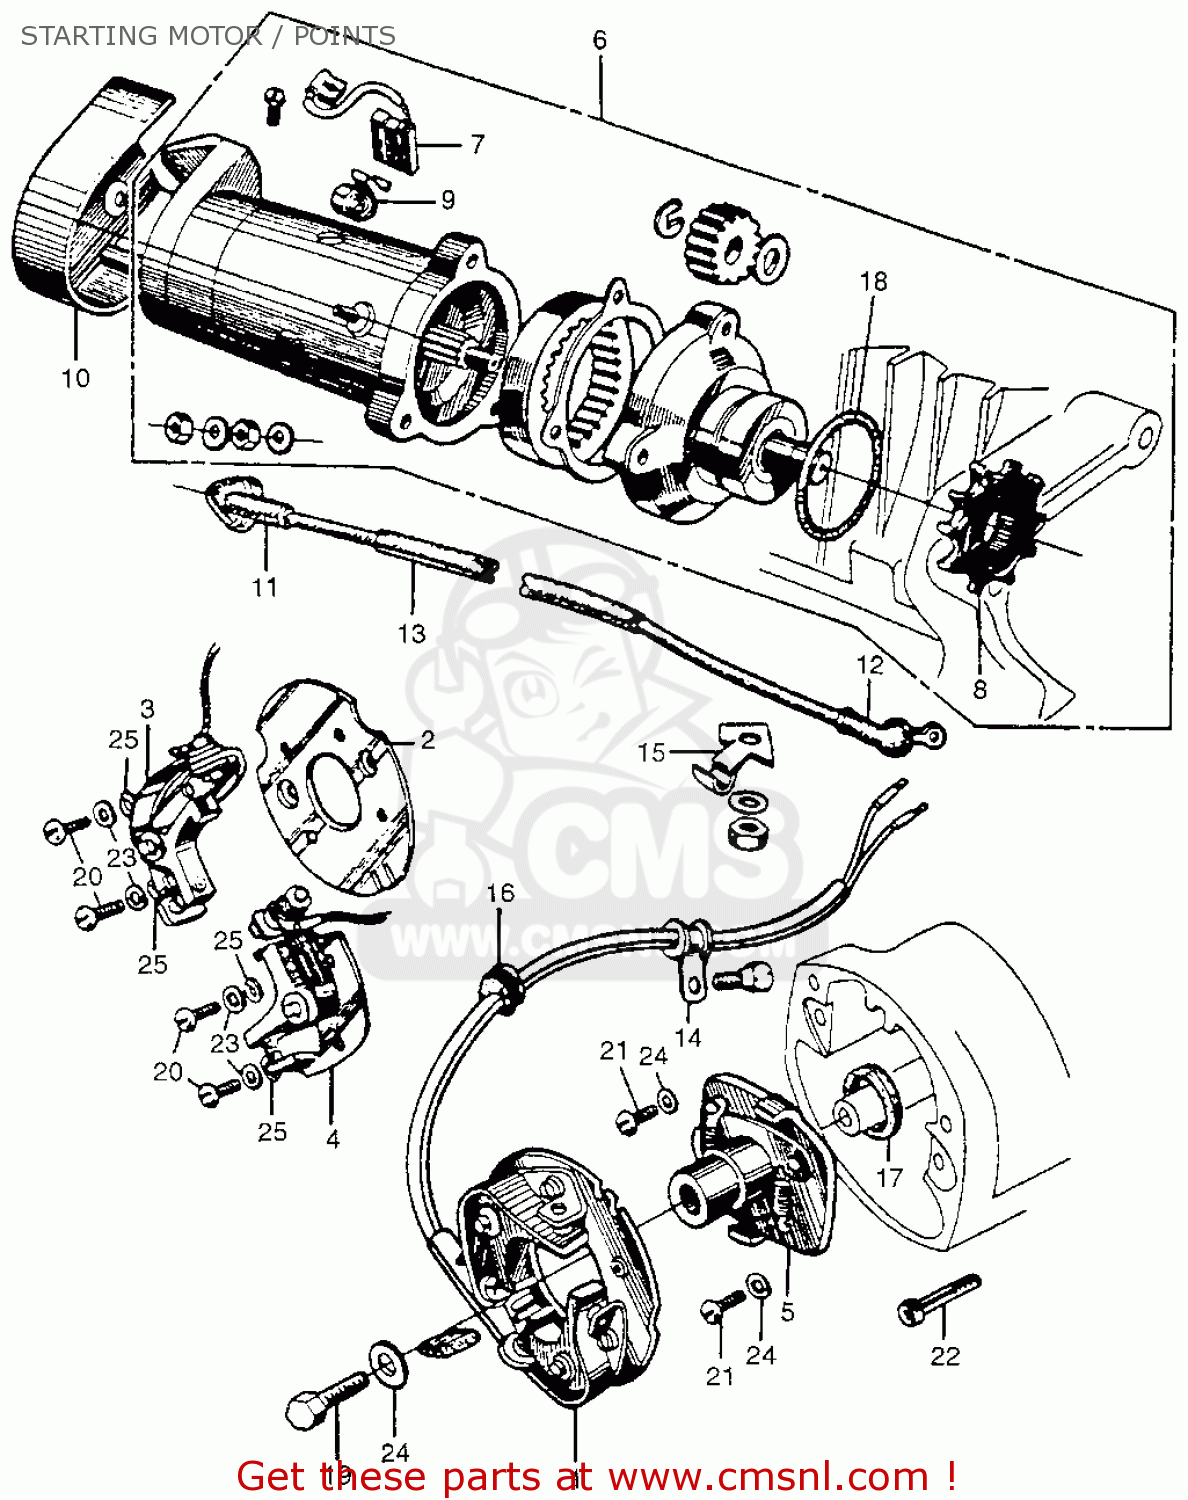 Cb450 Wiring Diagram from images.cmsnl.com